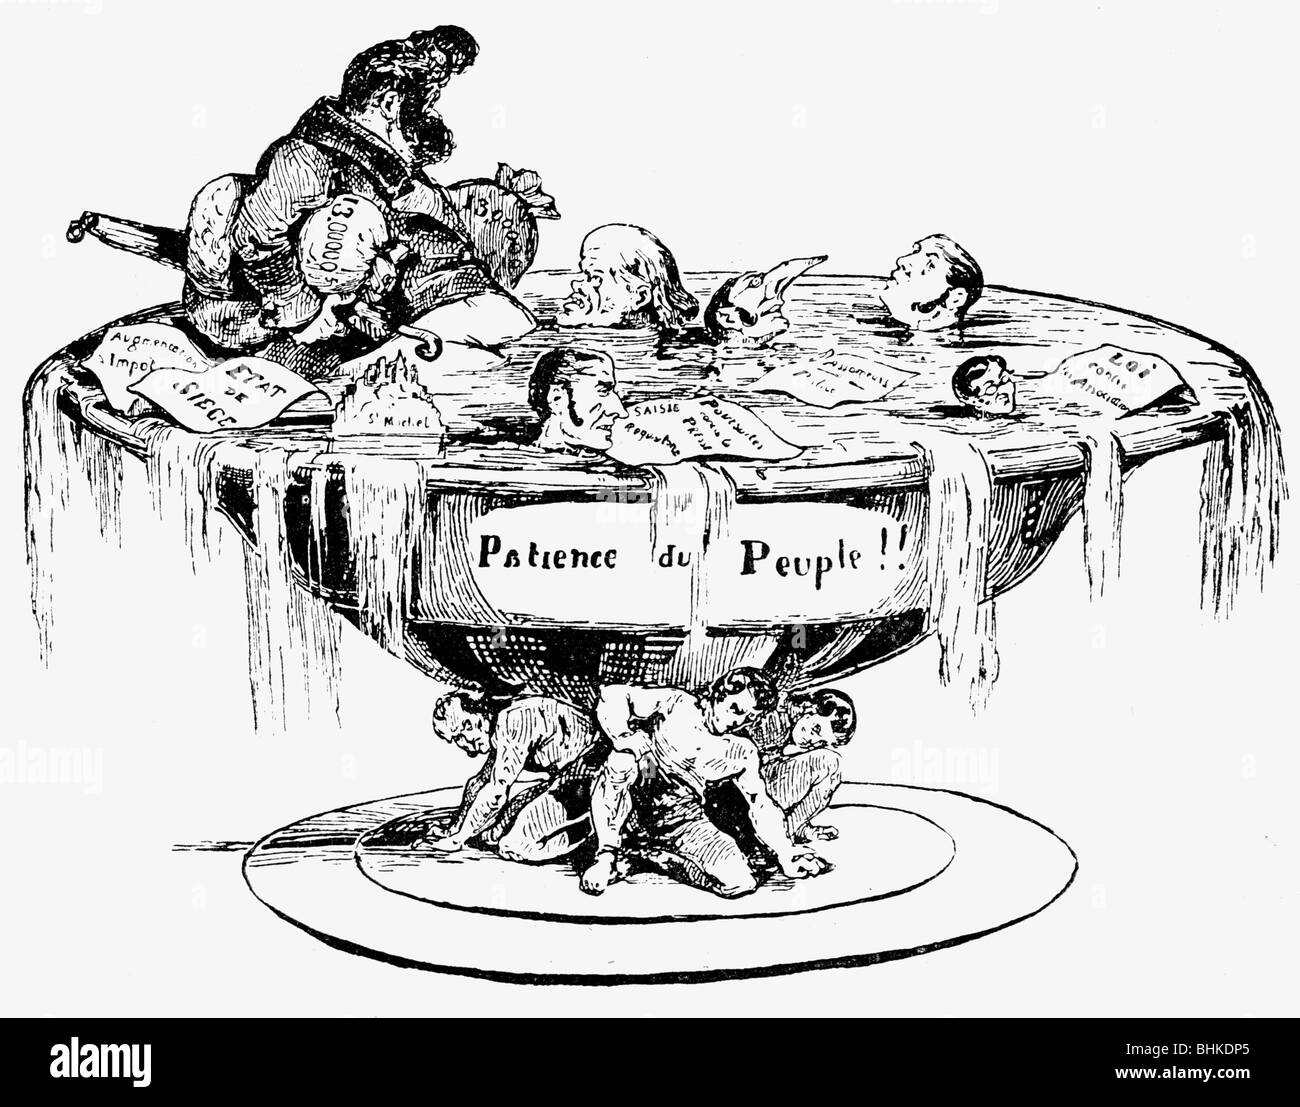 Louis Philippe, 6.10.1773 - 26. 8.1850, King of France 7.8.1830 -  24.2.1848, caricature, Liberty is destroying a fine plantation of carotts  which were planted by the Gardener Mr, Philippe to subdue the People, 1848  Stock Photo - Alamy